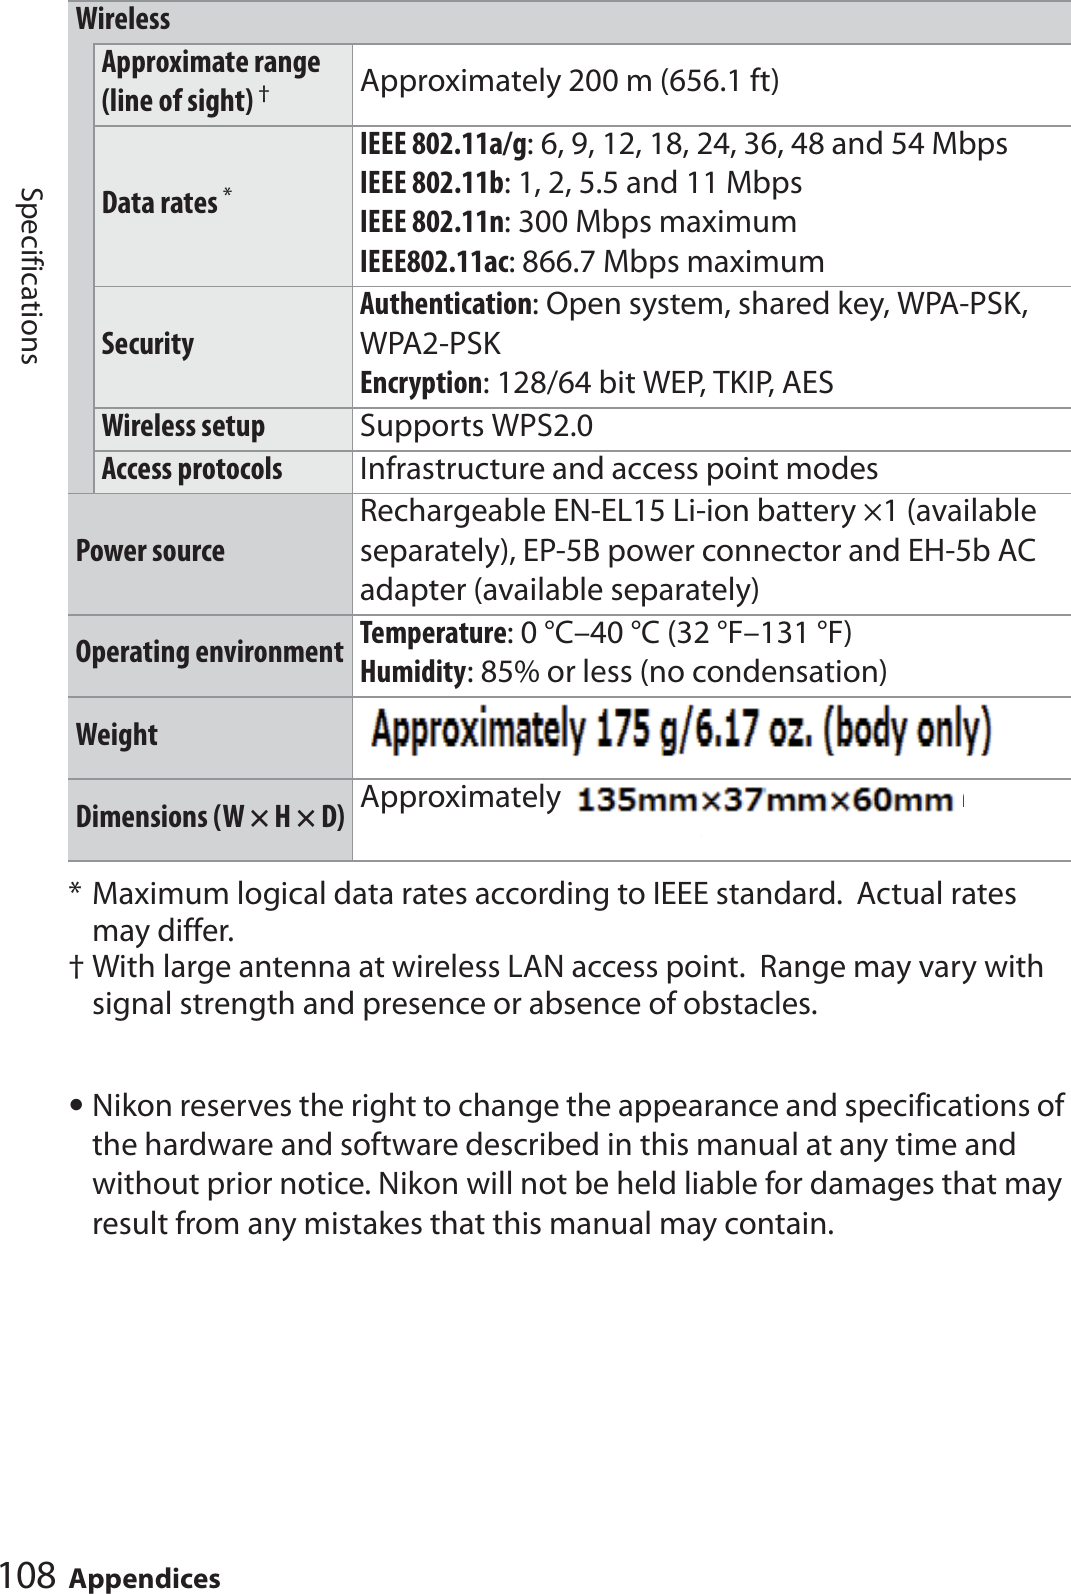 108 AppendicesSpecifications* Maximum logical data rates according to IEEE standard.  Actual rates may differ.† With large antenna at wireless LAN access point. Range may vary with signal strength and presence or absence of obstacles.•Nikon reserves the right to change the appearance and specifications of the hardware and software described in this manual at any time and without prior notice. Nikon will not be held liable for damages that may result from any mistakes that this manual may contain.Wireless Approximate range (line of sight) †Approximately 200 m (656.1 ft)Data rates *IEEE 802.11a/g: 6, 9, 12, 18, 24, 36, 48 and 54 MbpsIEEE 802.11b: 1, 2, 5.5 and 11 MbpsIEEE 802.11n: 300 Mbps maximumIEEE802.11ac: 866.7 Mbps maximumSecurityAuthentication: Open system, shared key, WPA-PSK, WPA2-PSKEncryption: 128/64 bit WEP, TKIP, AESWireless setup Supports WPS2.0Access protocols Infrastructure and access point modesPower sourceRechargeable EN-EL15 Li-ion battery ×1 (available separately), EP-5B power connector and EH-5b AC adapter (available separately)Operating environment Temperature: 0 °C–40 °C (32 °F–131 °F)Humidity: 85% or less (no condensation)Weight Approximately ### g/### oz. (including battery)/Approximately ### g/### oz. (body only)Dimensions (W × H × D) Approximately ### mm × ### mm × ### mm (###in. × ### in. × ### in.)(###in. × ### in. × ### in.)